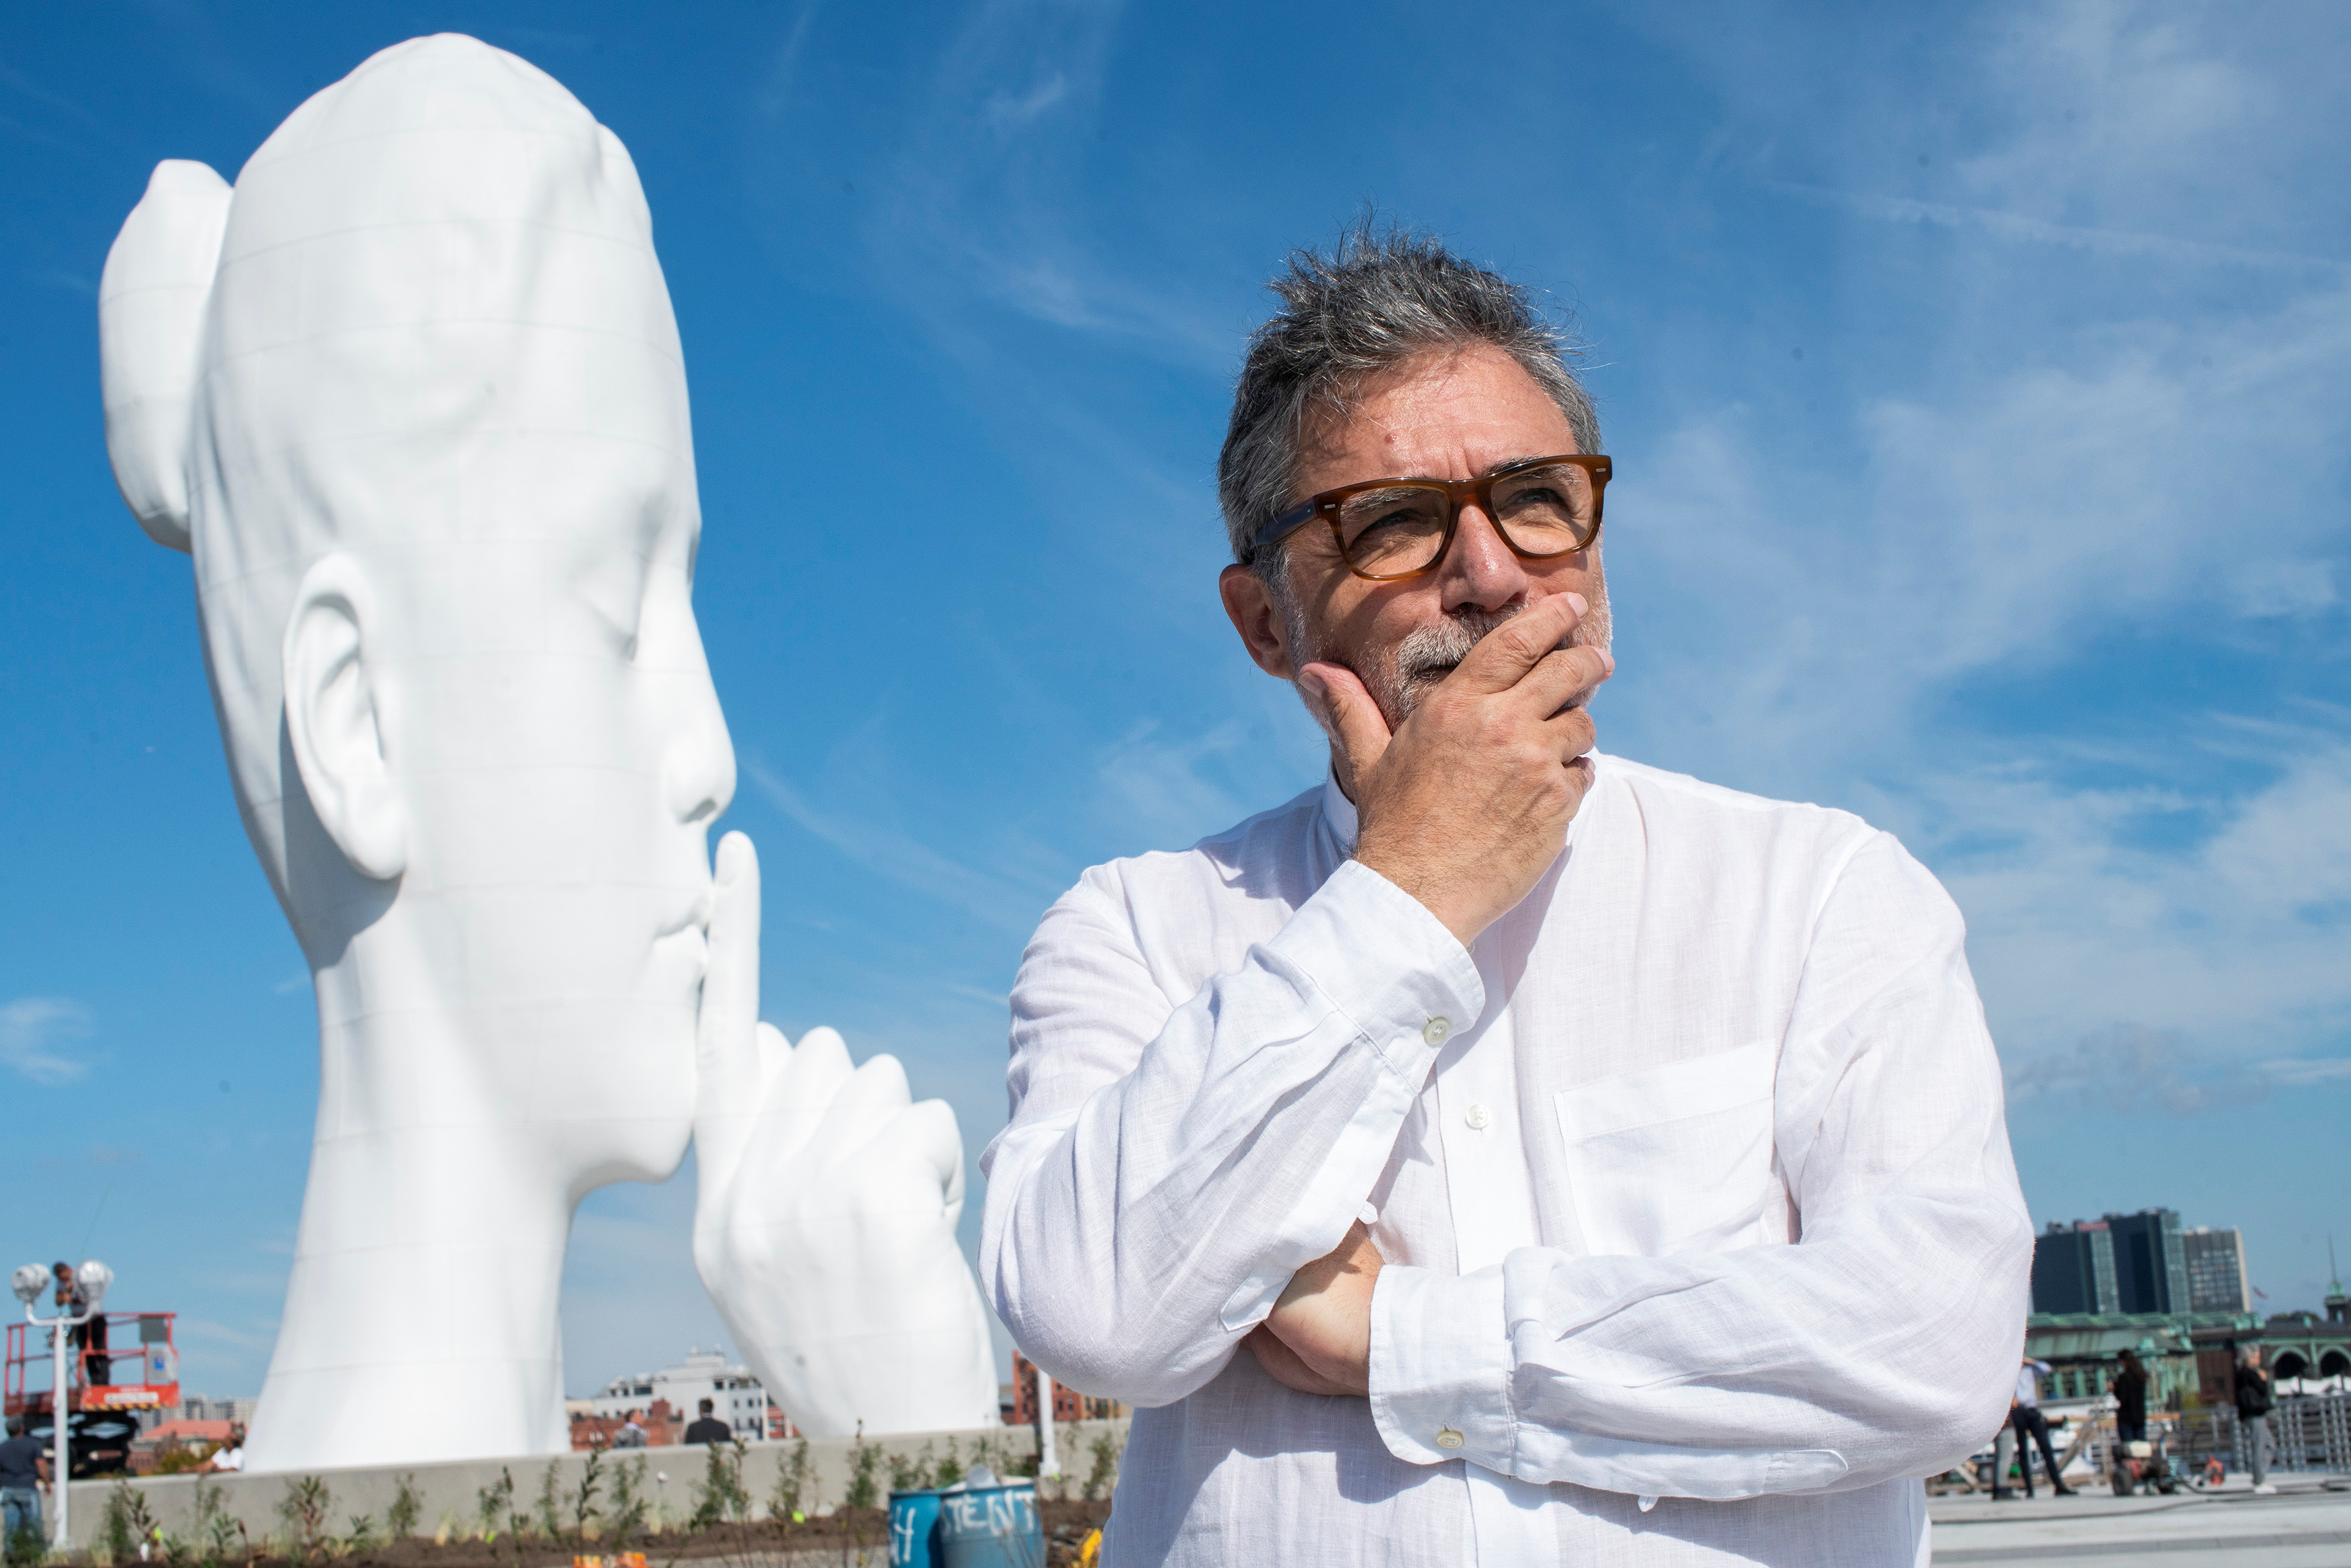 Artist Jaume Plensa poses for a photo near his statue 